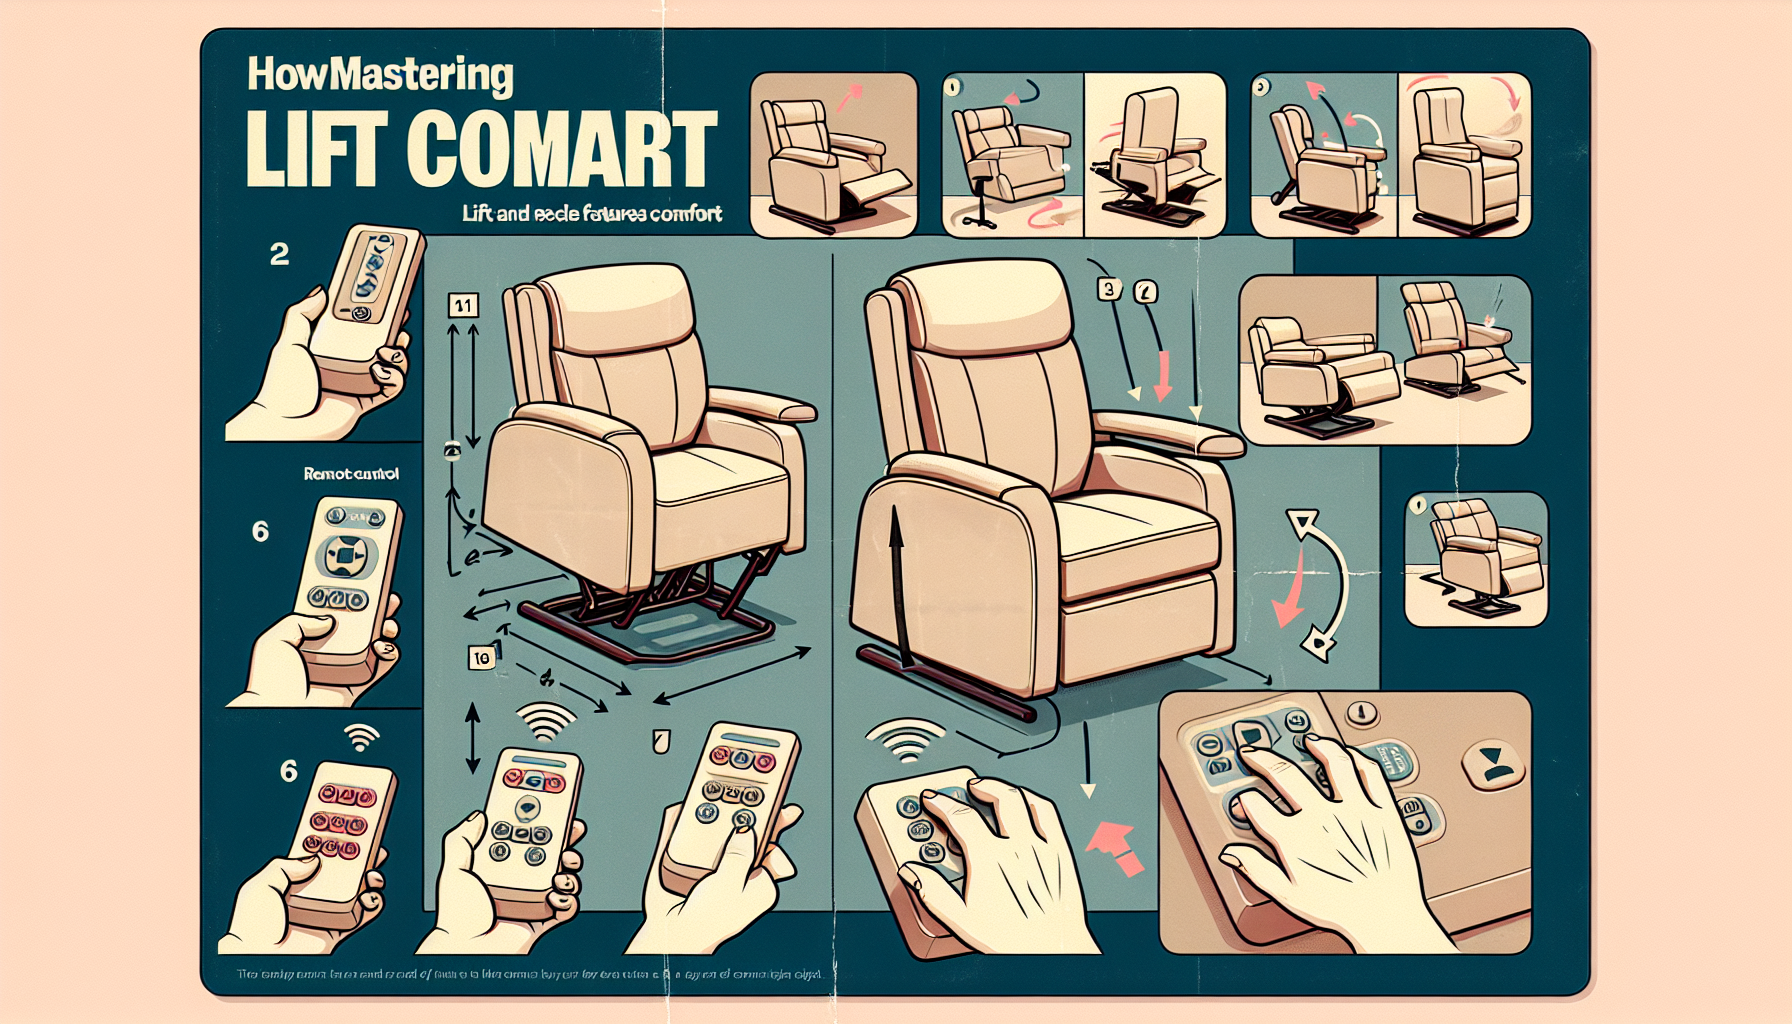 Mastering Lift Chair Comfort: Your Guide to Using Lift and Recline Remote Controls